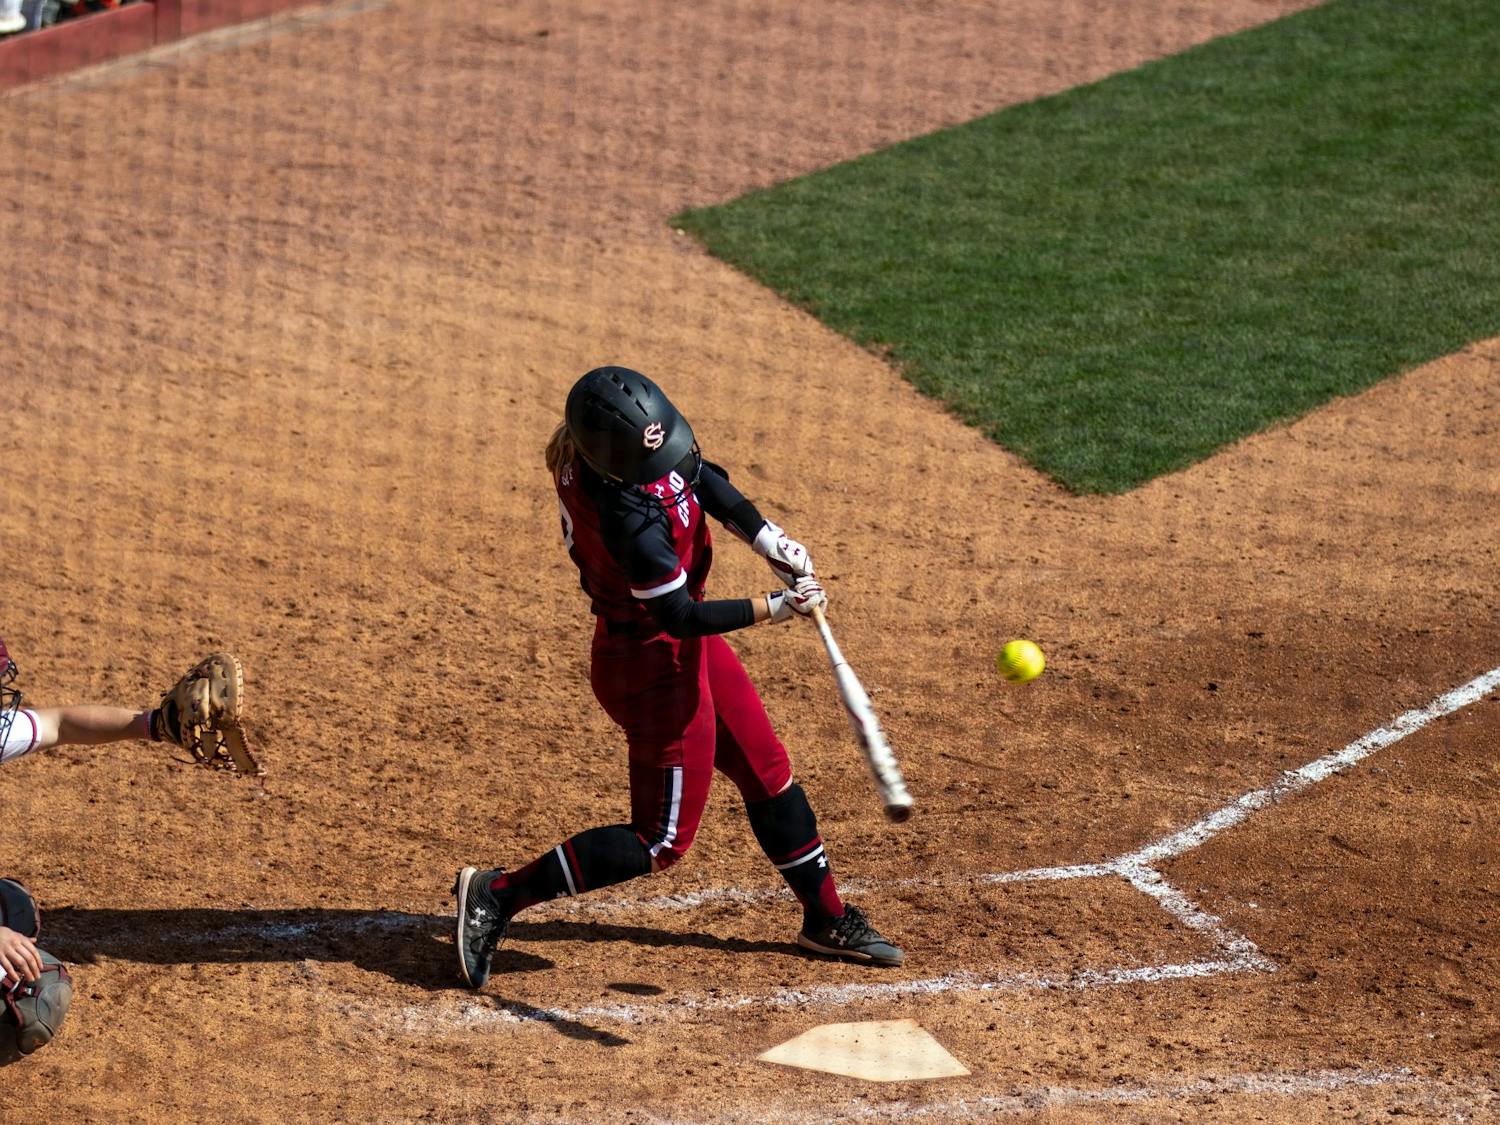 The South Carolina softball team couldn't come away with a win in the Carolina Classic. The Gamecocks lost to Miami (OH), Virginia Tech and Ohio State.&nbsp;